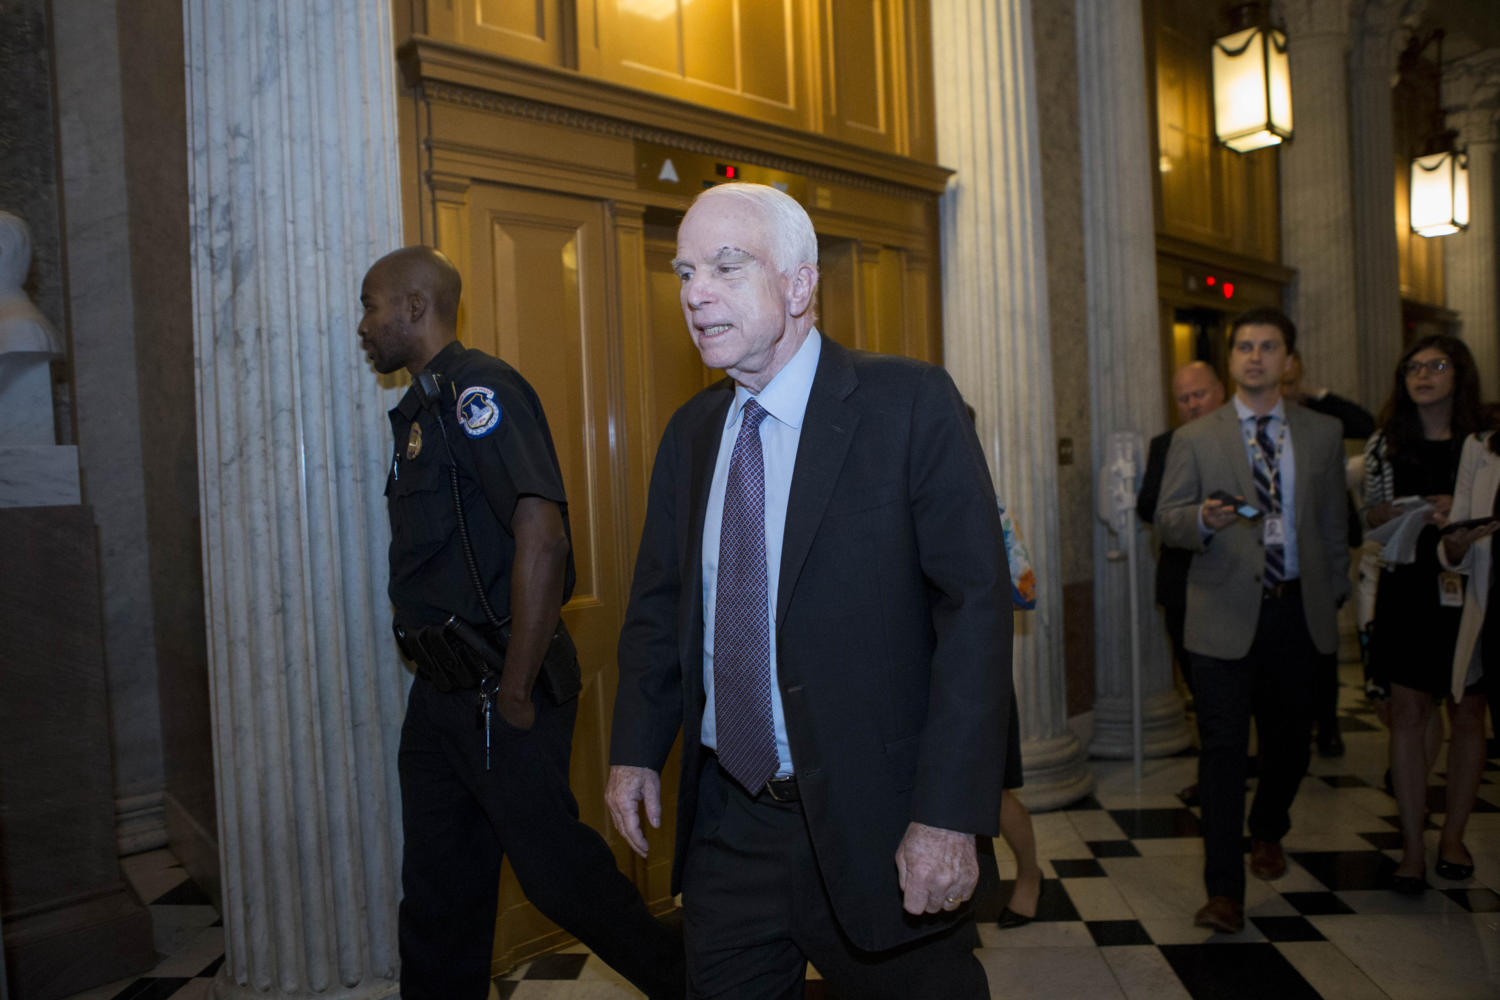 Sen. John McCain (R-AZ) walks to the senate chamber prior to voting against a 'Skinny Repeal' bill which would repeal The Affordable Care Act on July 28, 2017 in Washington, D.C. The Republican bill failed 49-51 with McCain, Sen. Susan Collins of Maine and Sen. Lisa Murkowski of Alasaka voting 'no' alongside Democrats.  (Alex Edelman/ZUma Press/TNS)